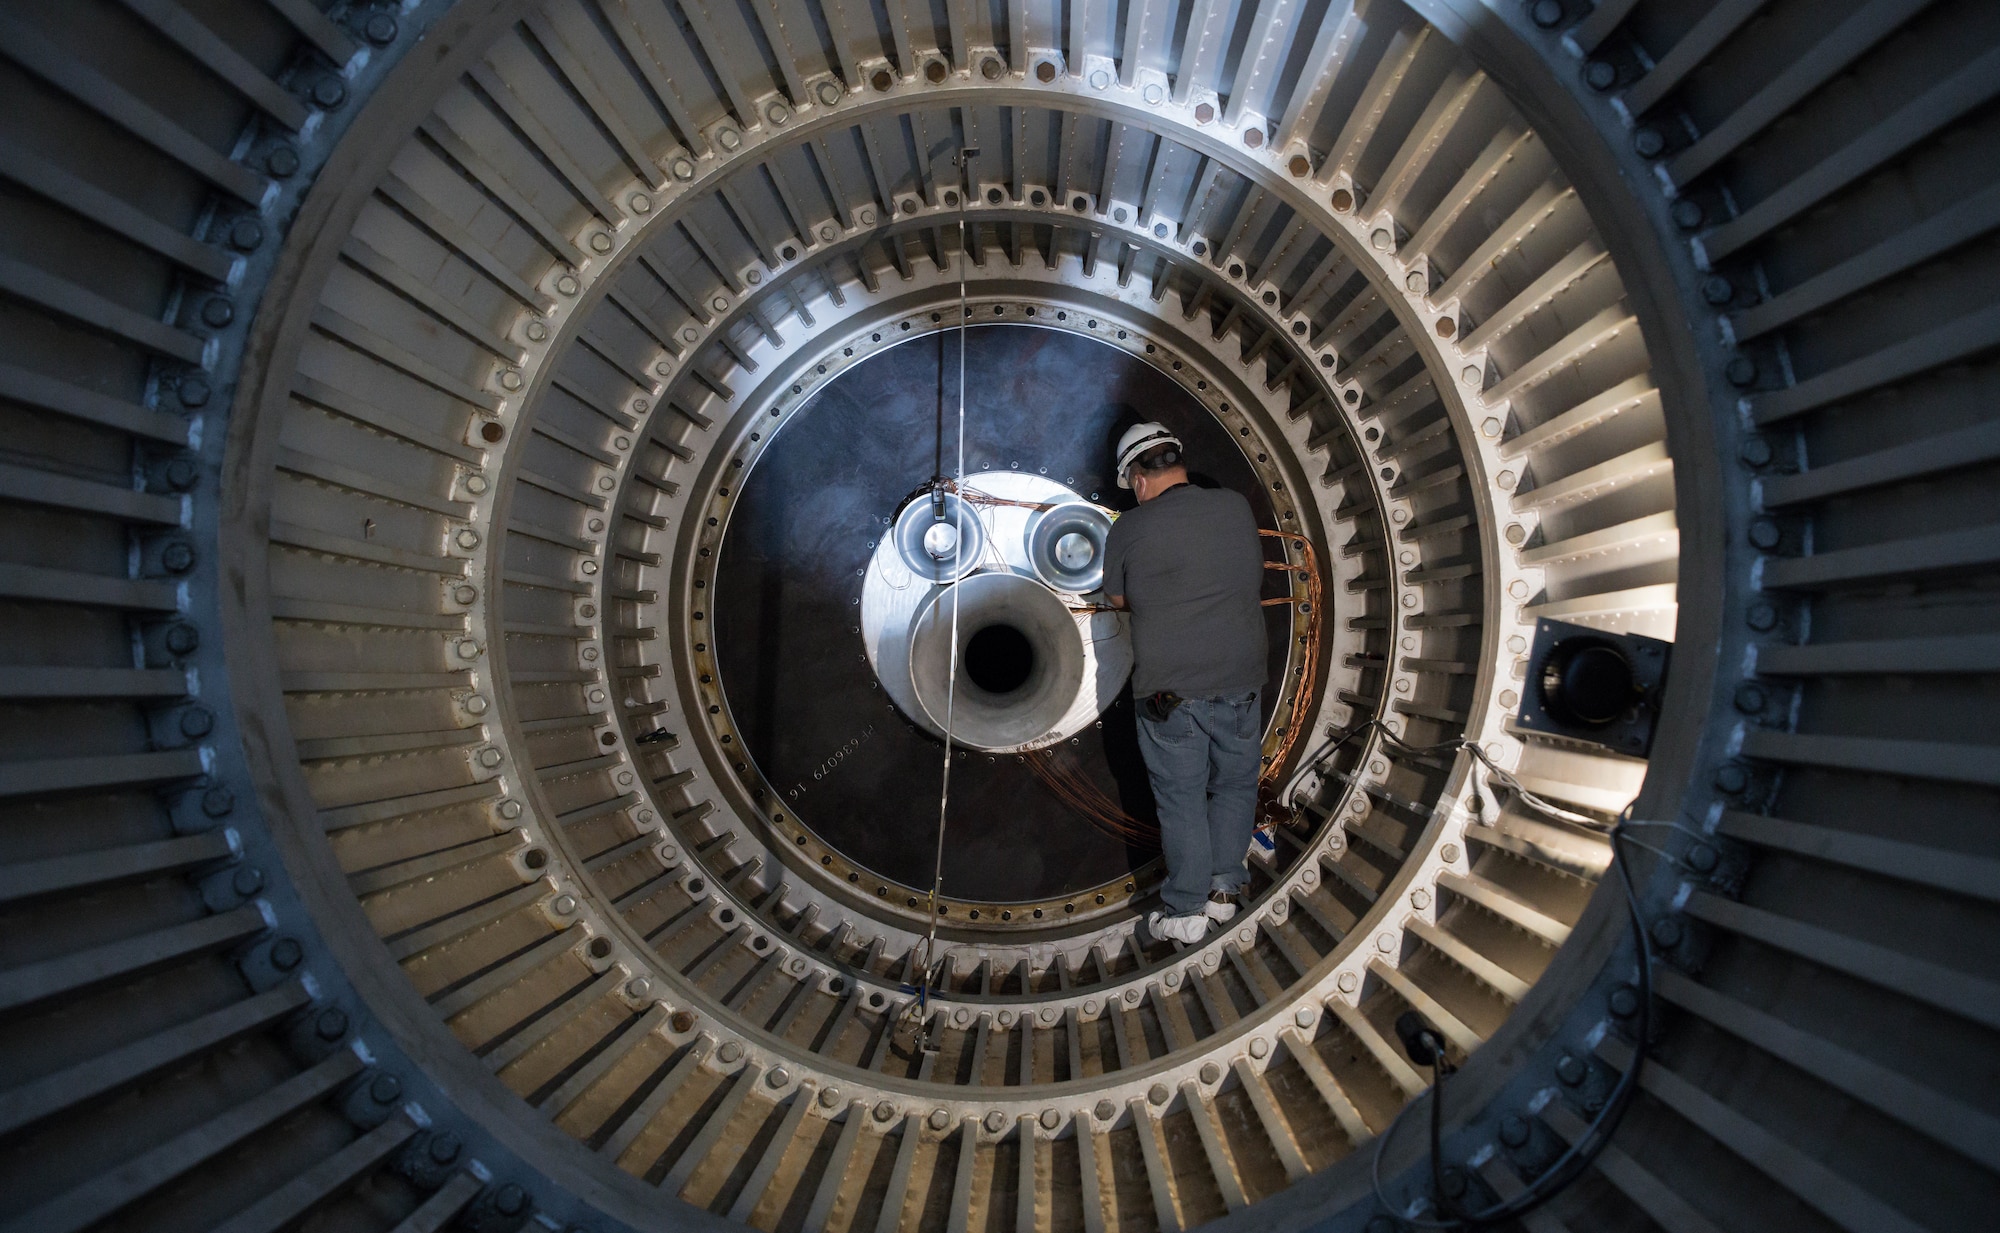 Jay Caldwell, an outside machinist, works on venturis mounted inside the scavenging scoop in the 16-foot supersonic wind tunnel, Nov. 3, 2020, at Arnold Air Force Base, Tenn. The scoop was modified to allow for the calibration of a large-scale mass flow assembly. (U.S. Air Force photo by Jill Pickett)